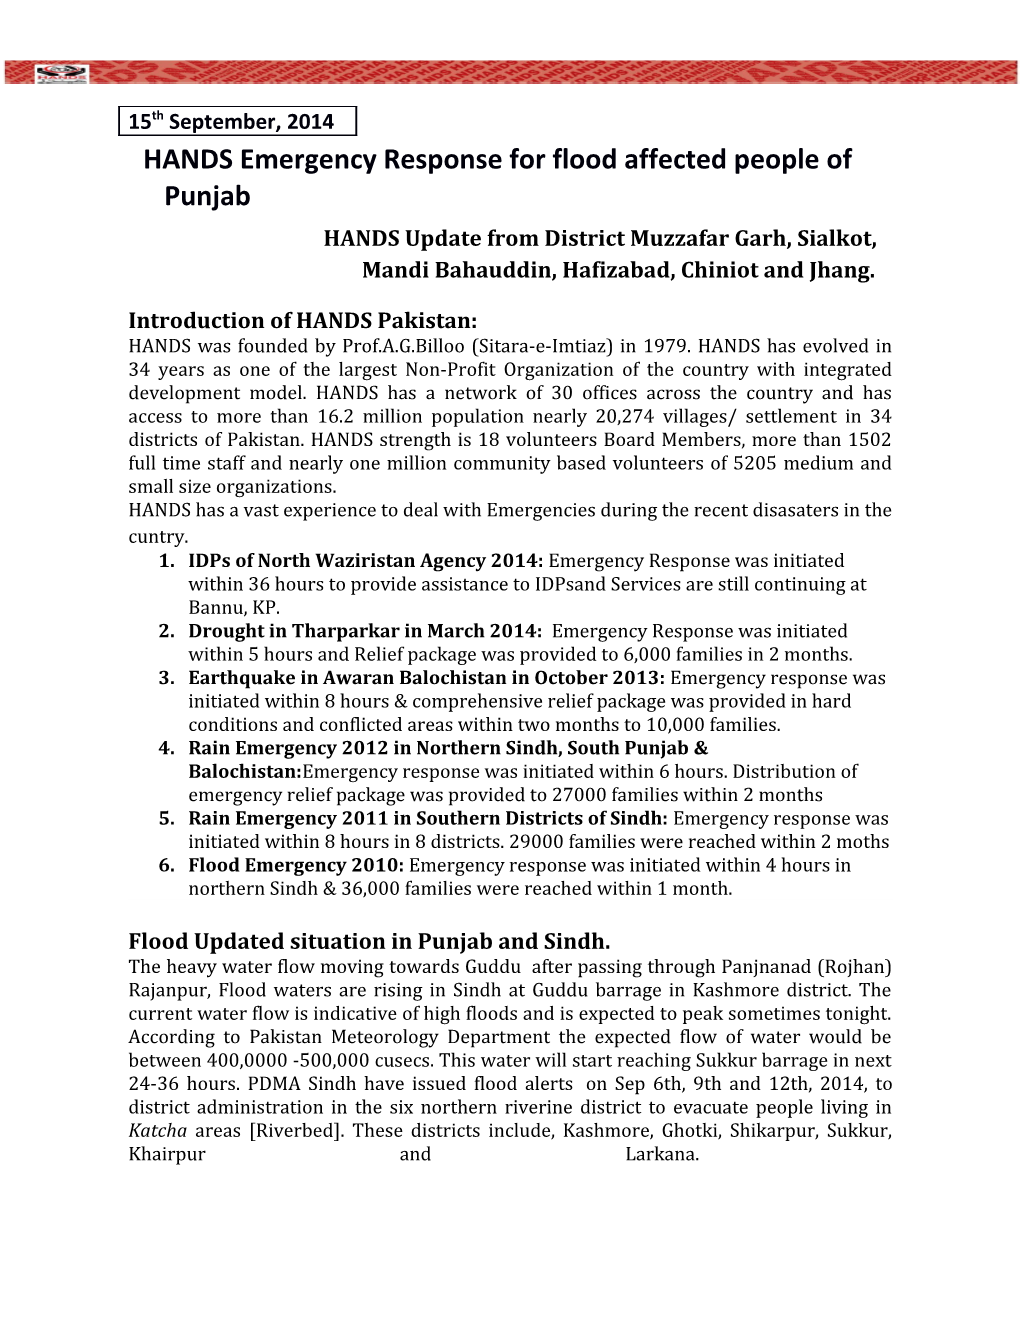 HANDS Emergency Response for Flood Affected People of Punjab